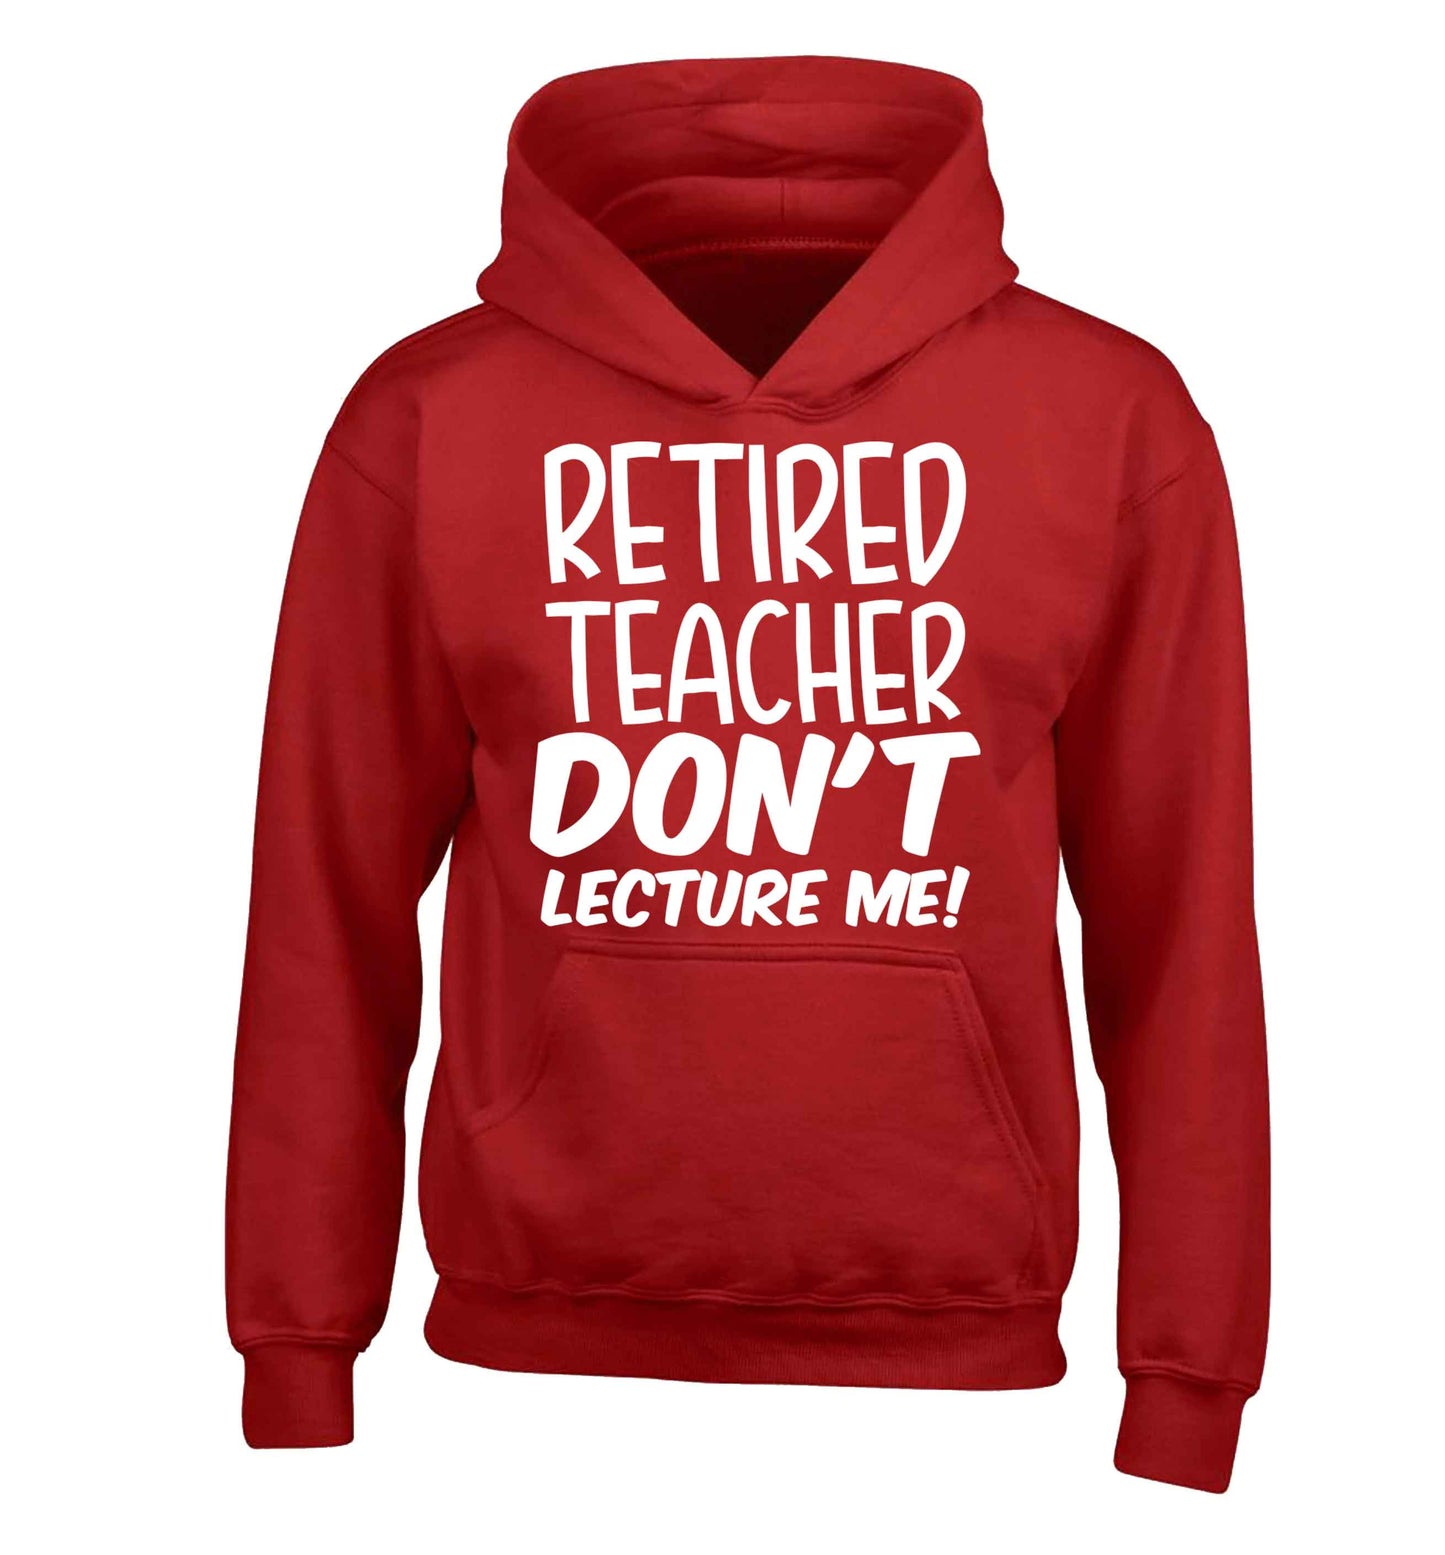 Retired teacher don't lecture me! children's red hoodie 12-13 Years